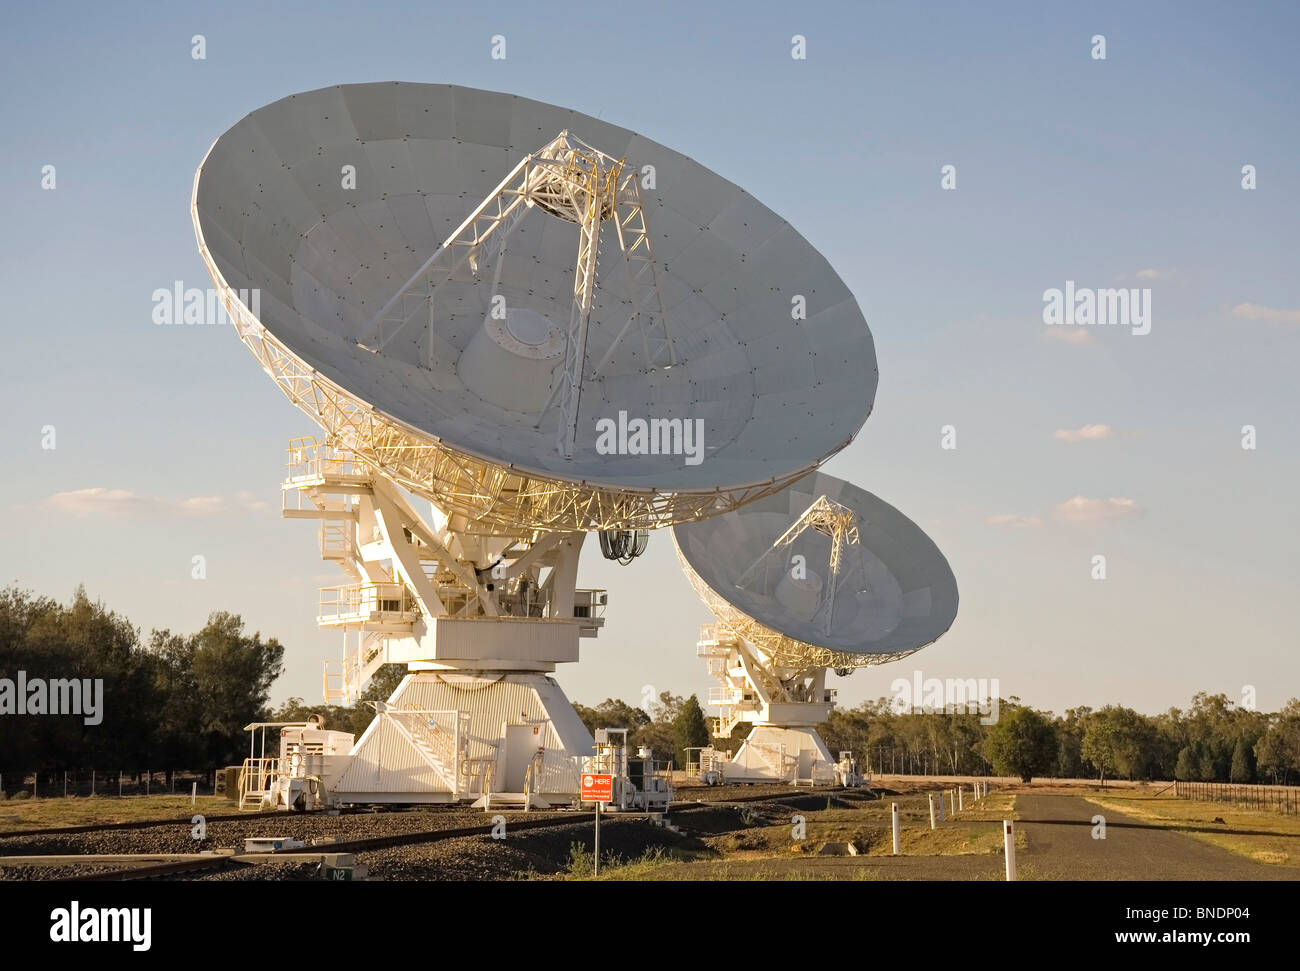 Two Compact Array Telescopes used for scientific research, Paul Wild Observatory, Narrabri, western NSW, Australia Stock Photo